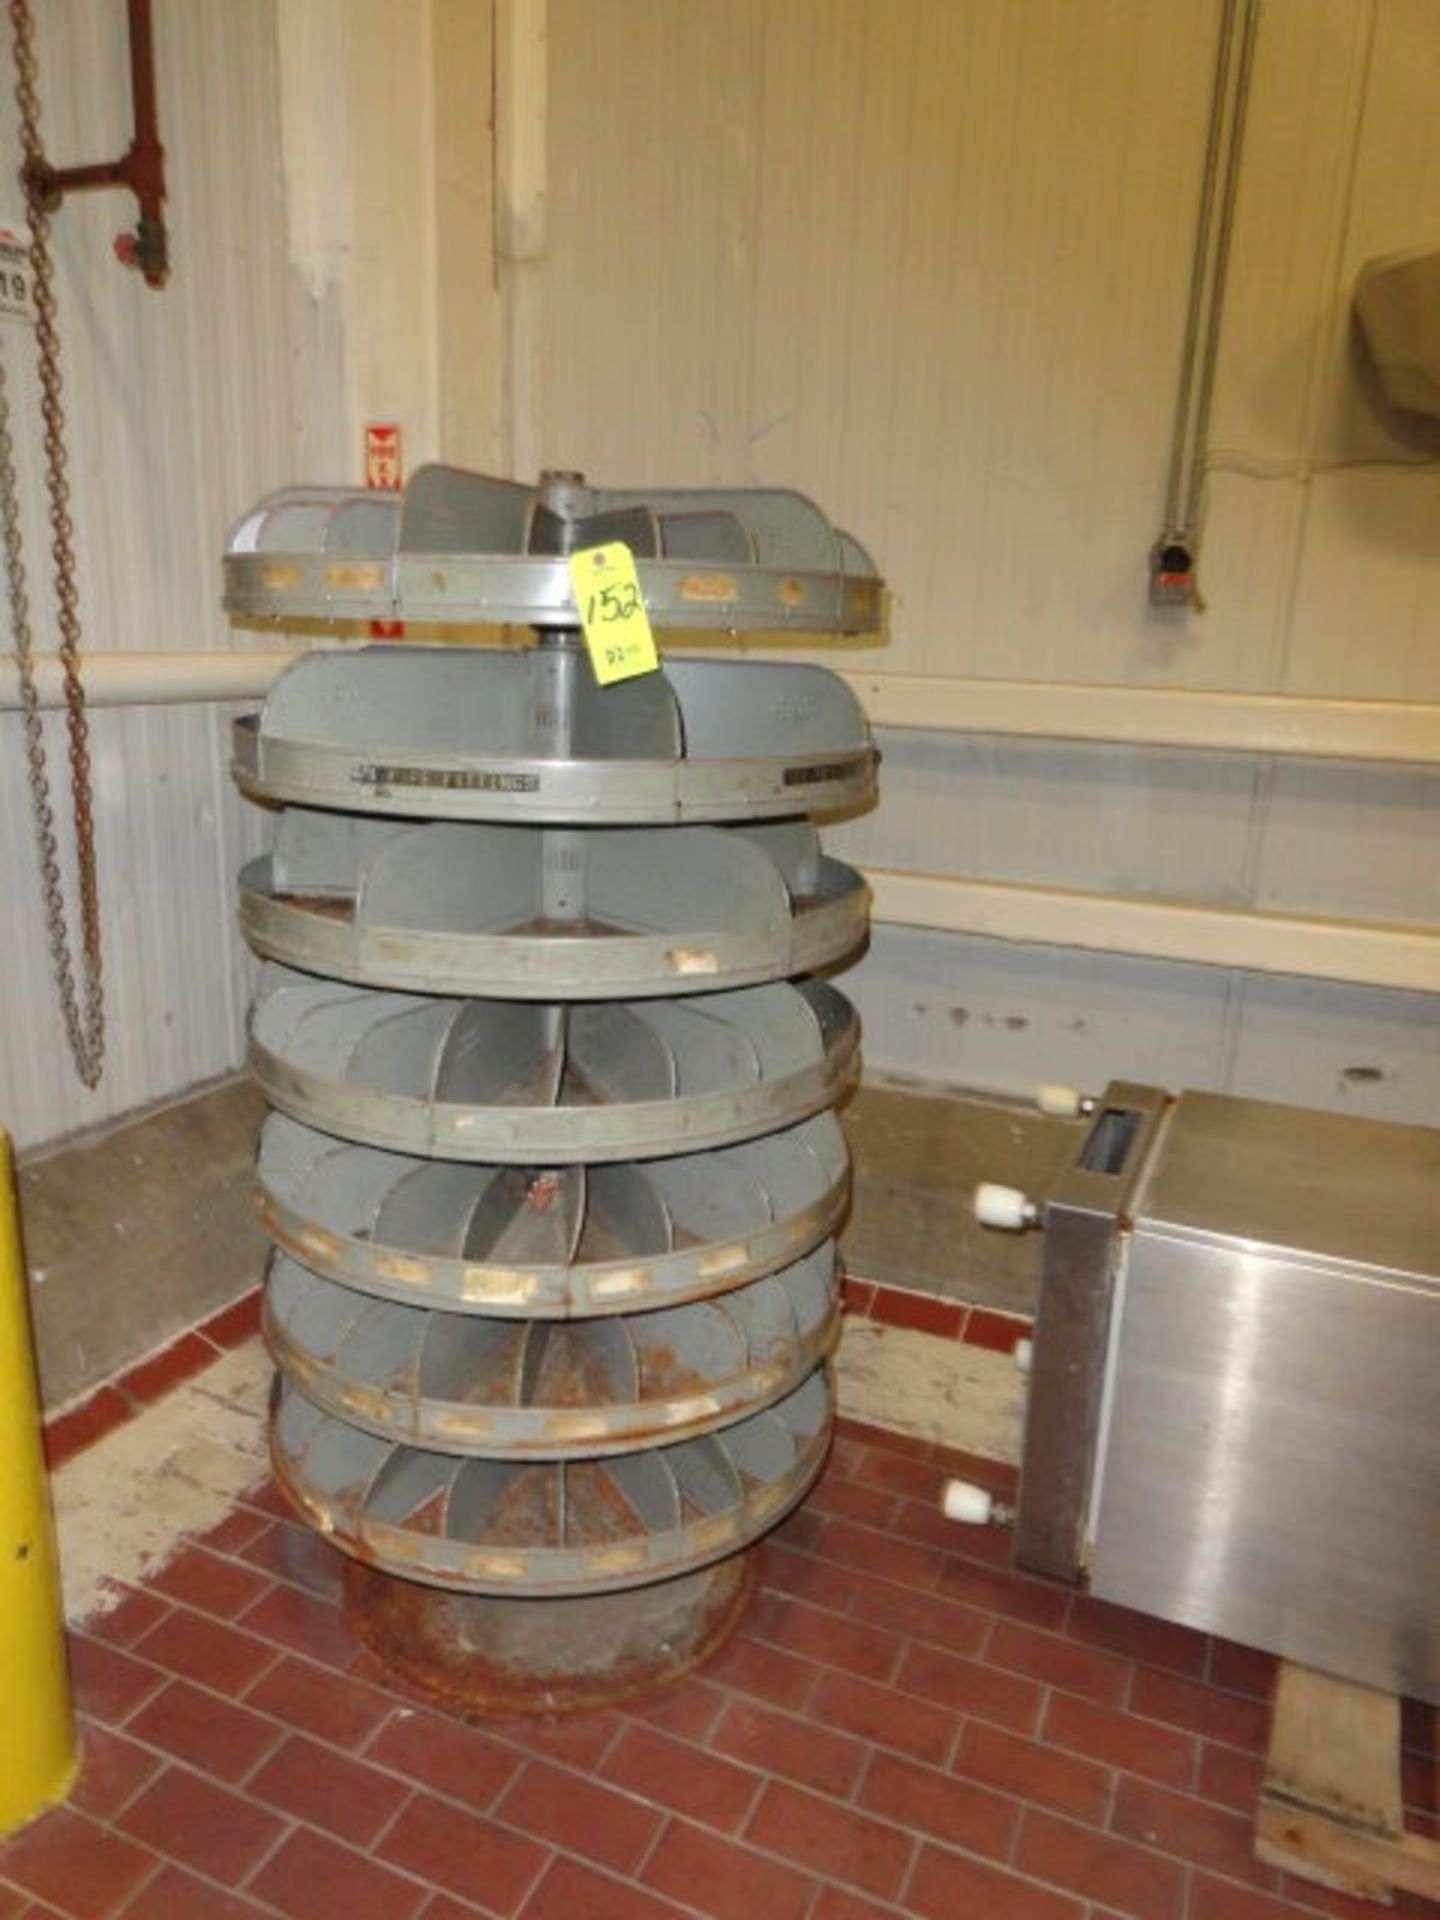 7-Level Lazy Susan, ($20.00 Required Loading Fee- Rigger: Nebraska Stainless - Norm Pavlish -